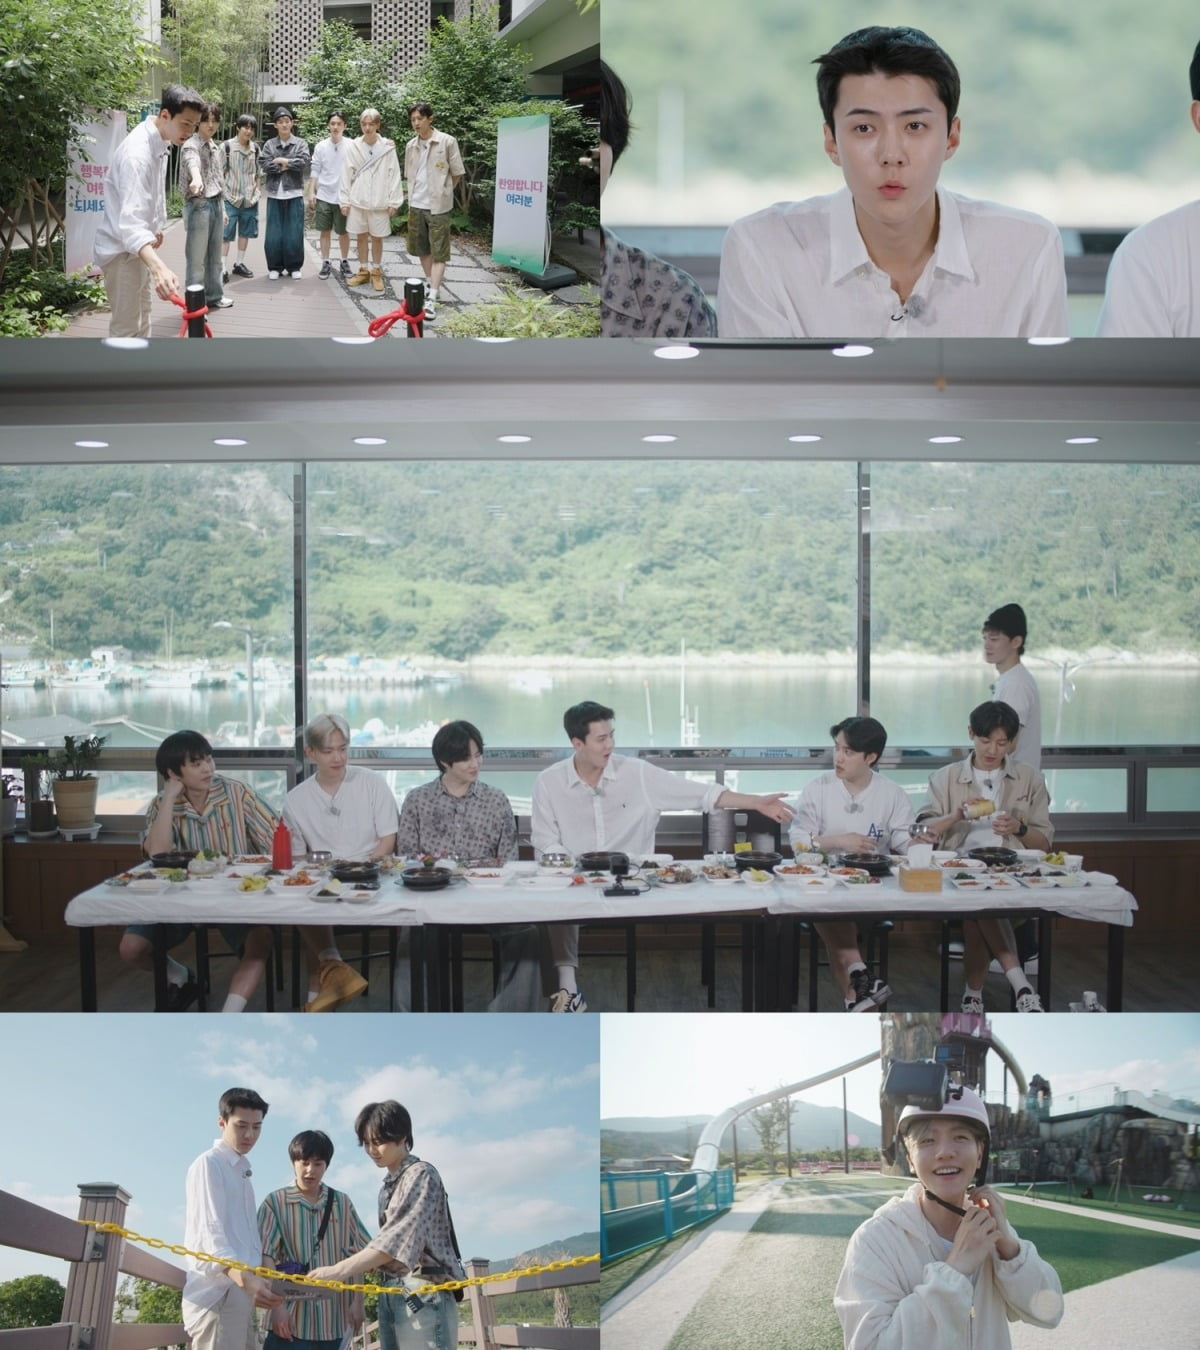 EXO's Travel the World on a Ladder season 4 will be released